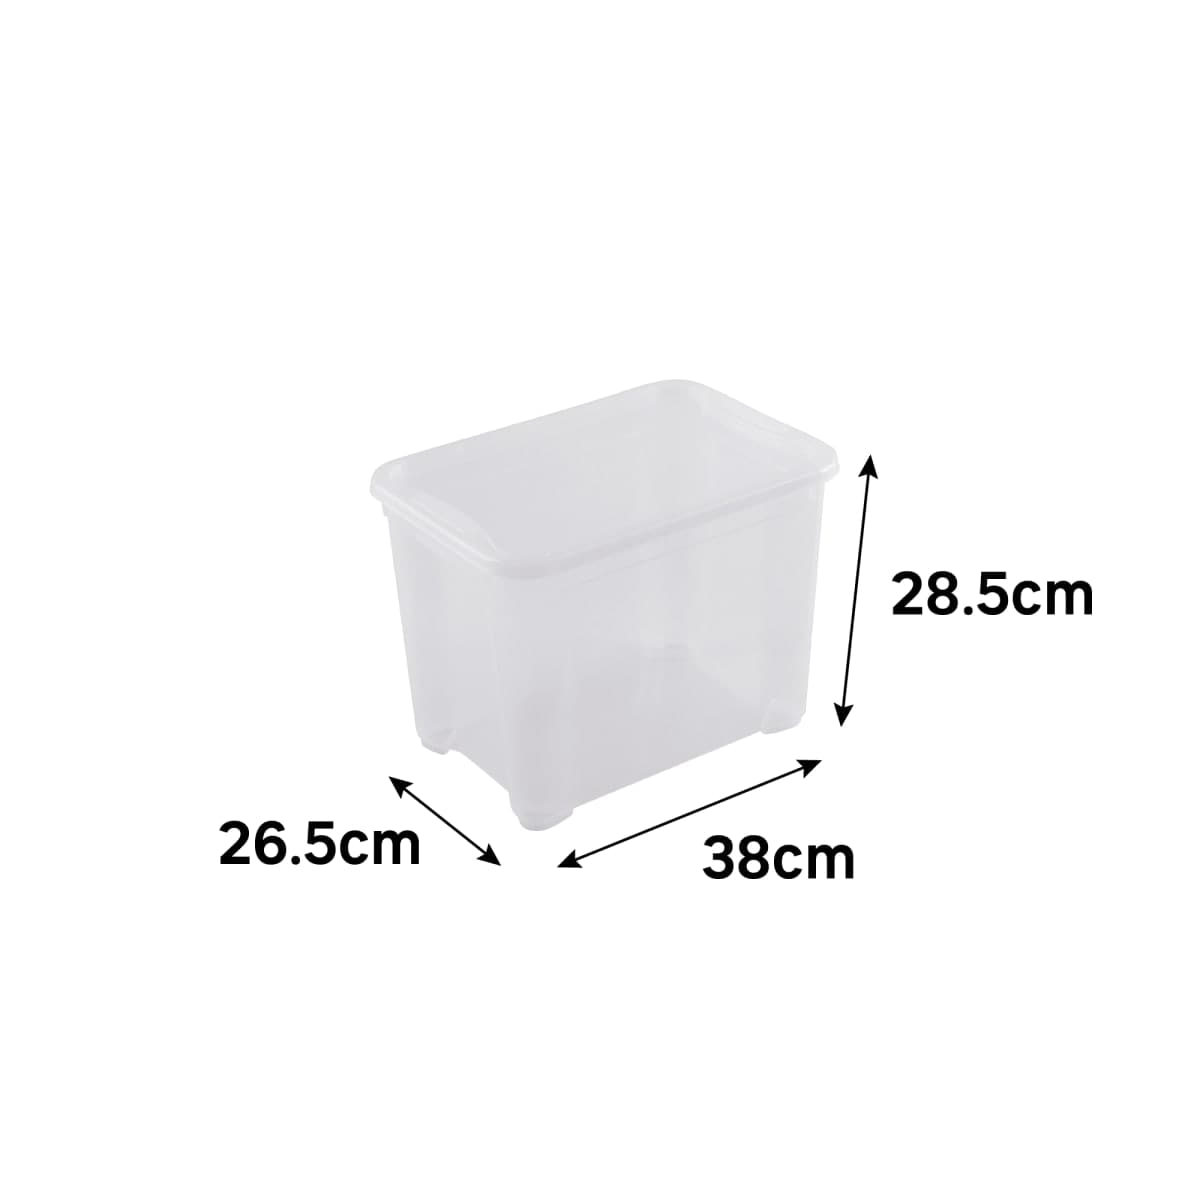 CONTAINER WITH LID T-BOX S W38xD26.5xH28.5CM 18LT TRANSPARENT PLASTIC LID - best price from Maltashopper.com BR410170874